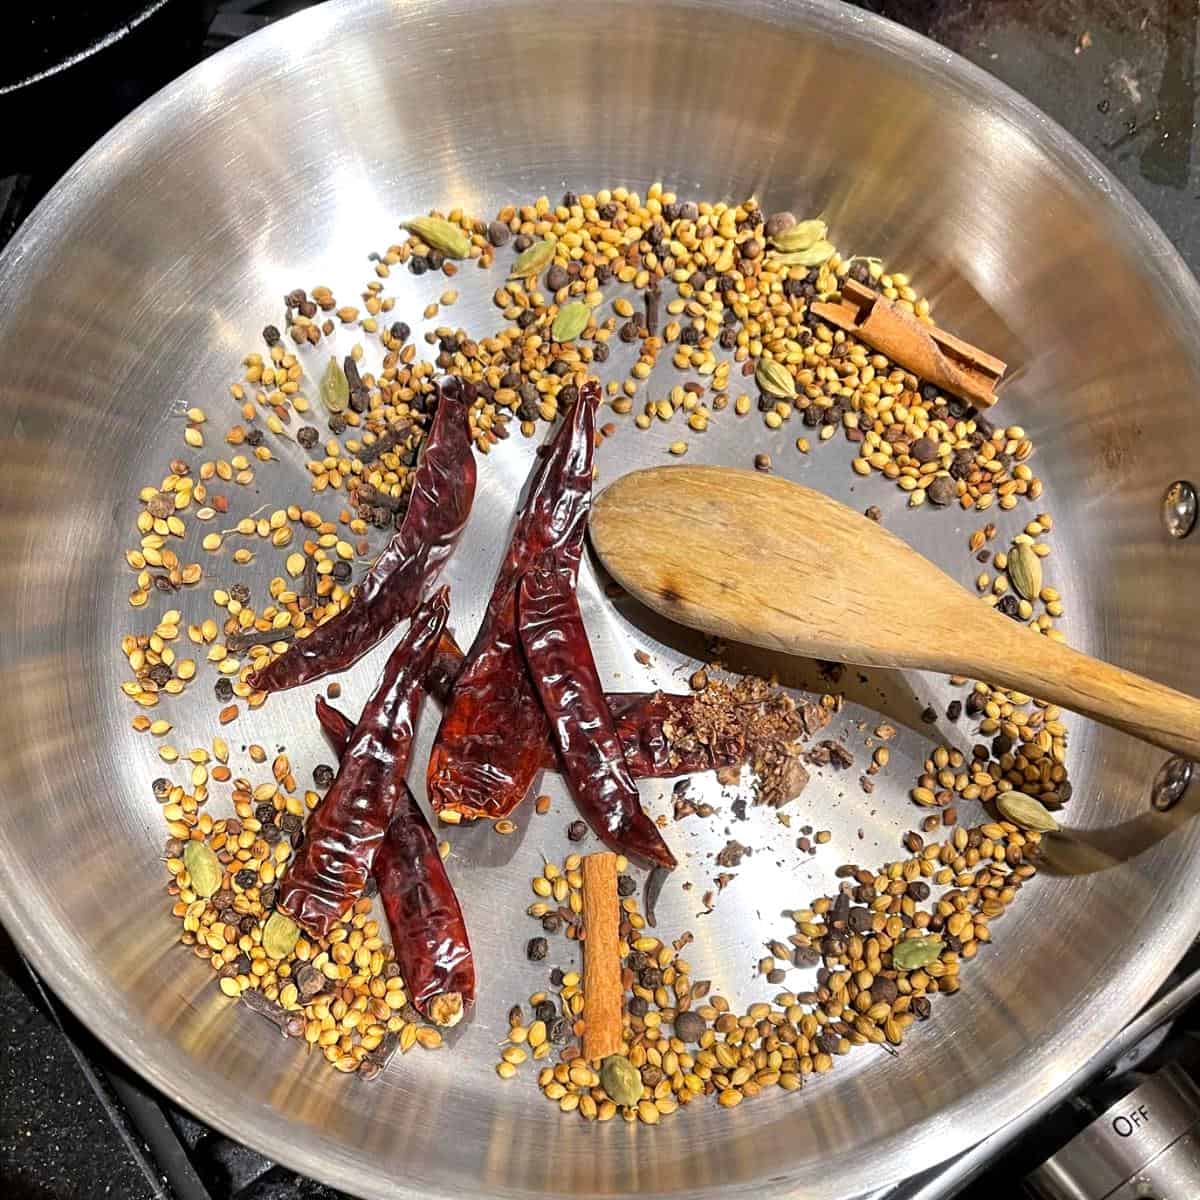 Whole spices after toasting with chili peppers and nutmeg added.